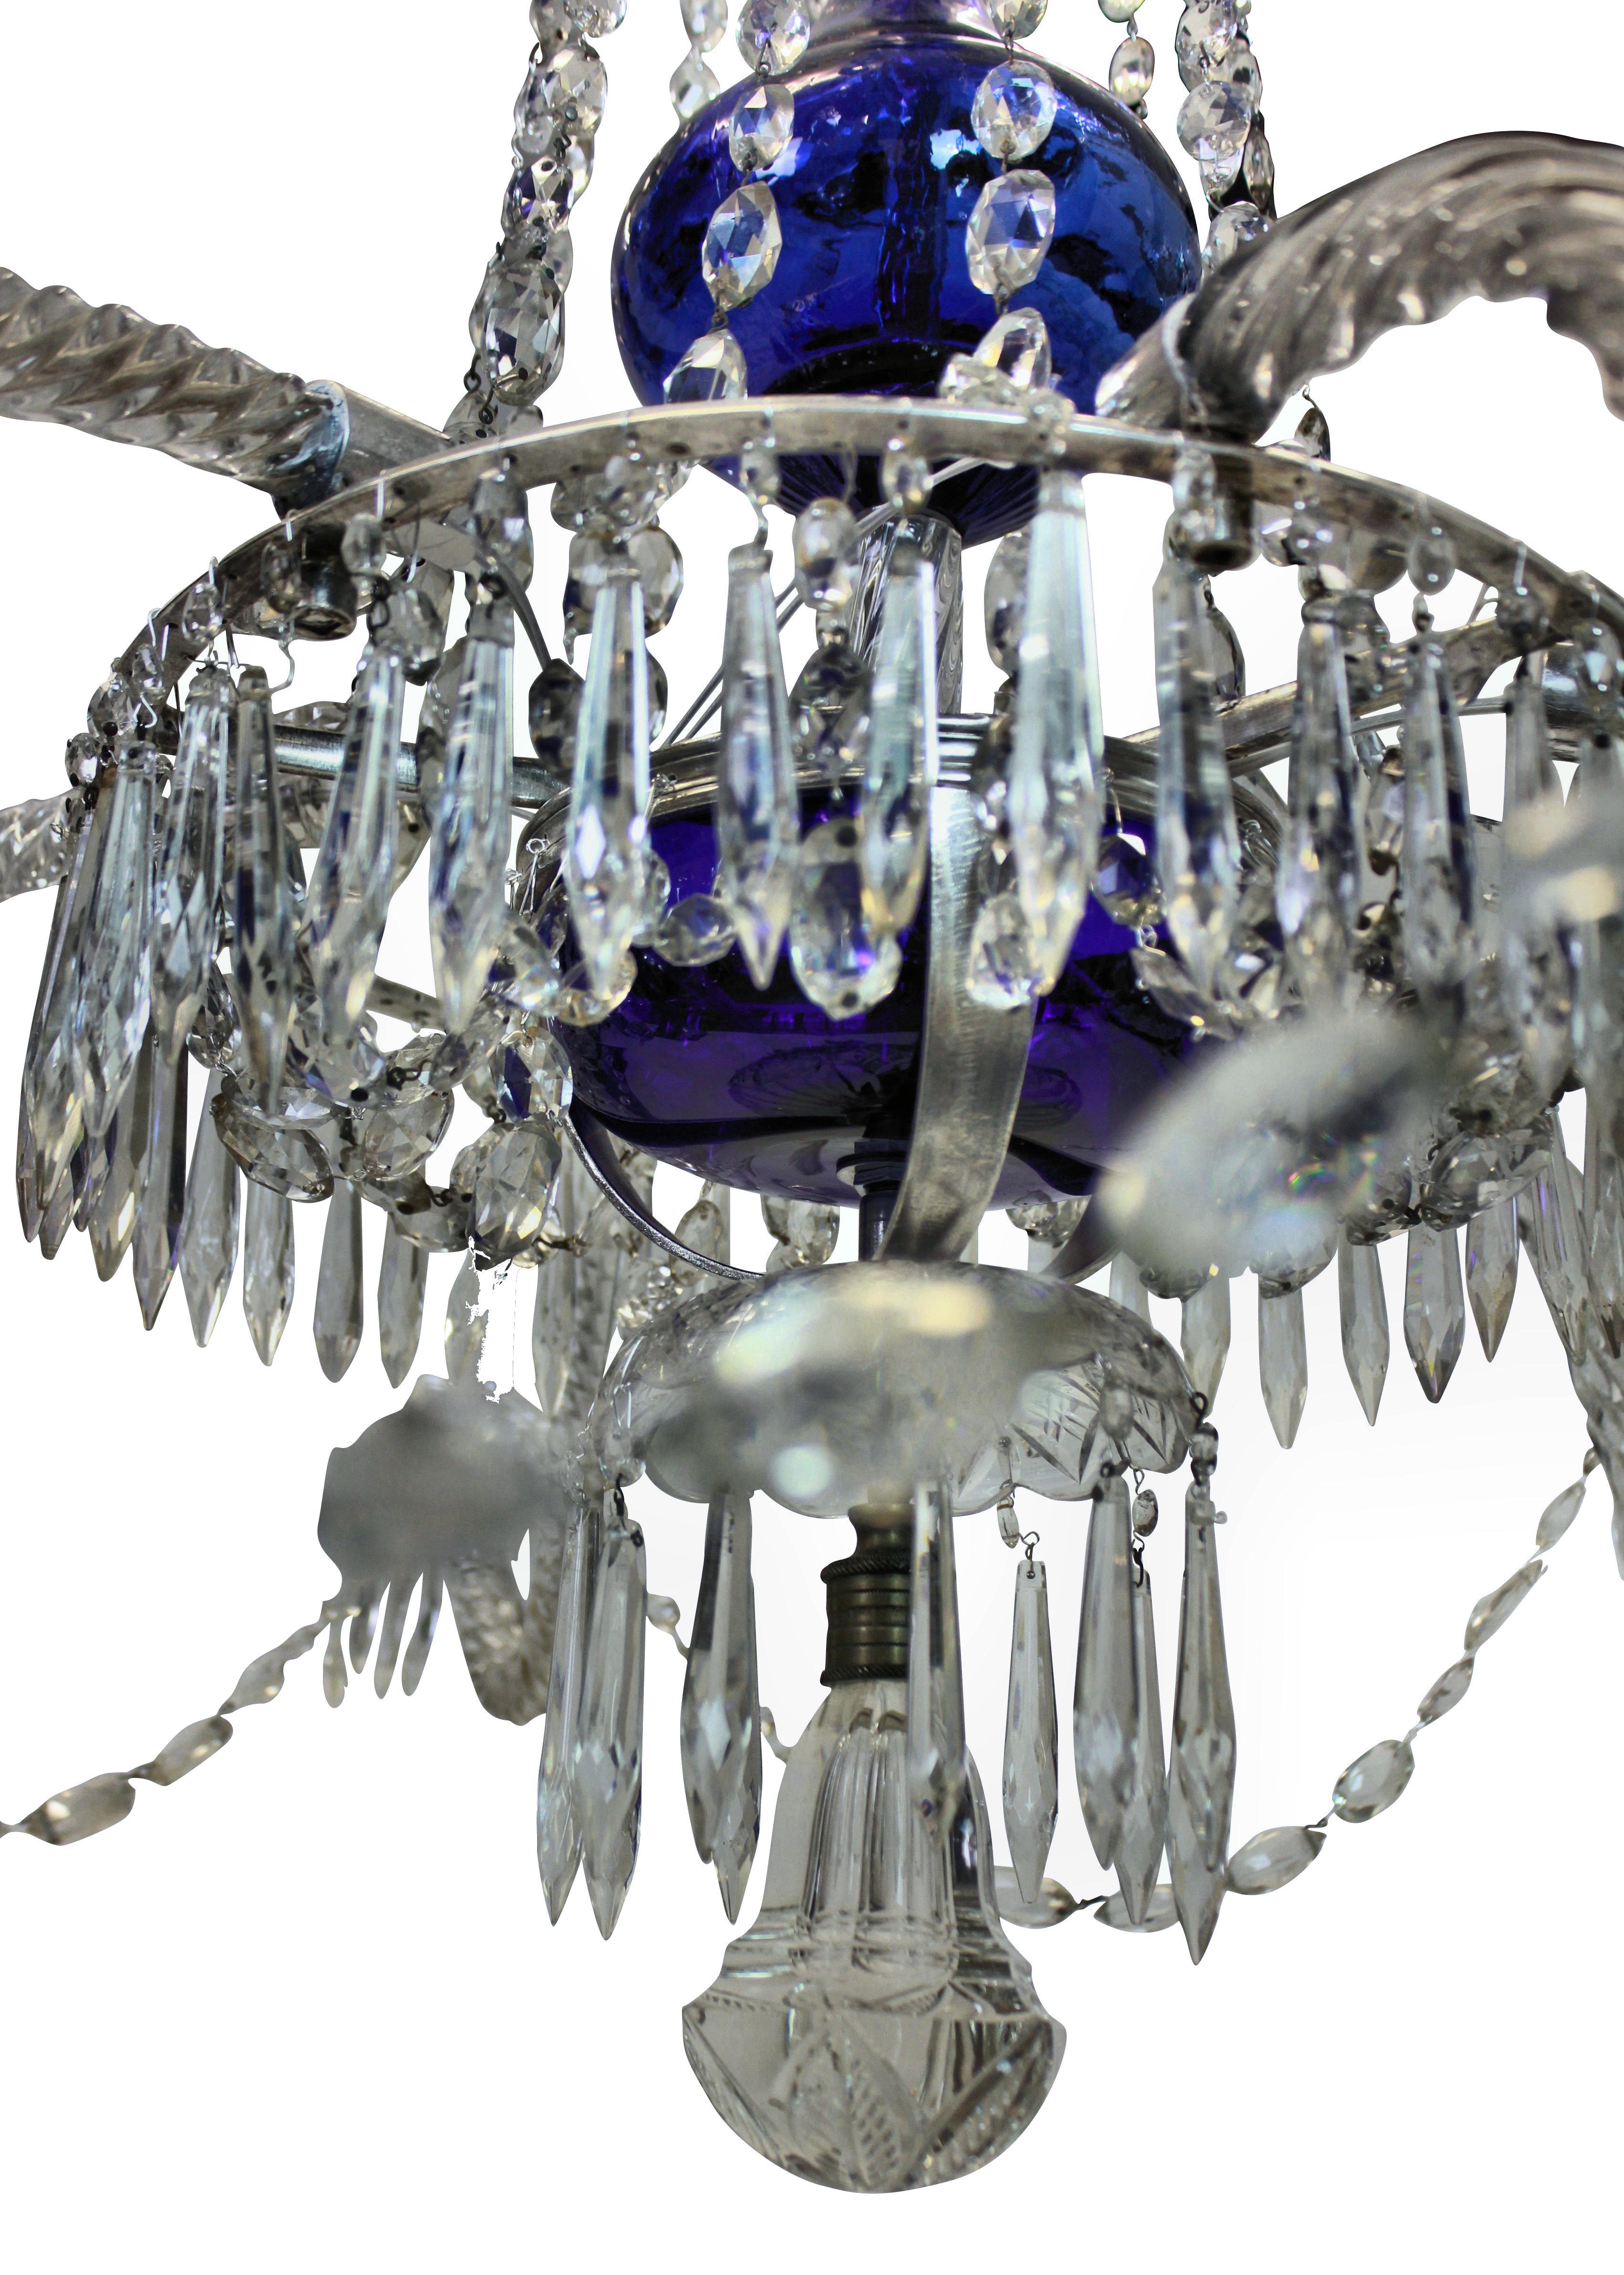 A fine XIX Century Swedish six branch chandelier with a central stem containing blue glass, a blue glass domed crown to the top and clear cut glass dressings, arms and pendants. The metal work is silver plated.